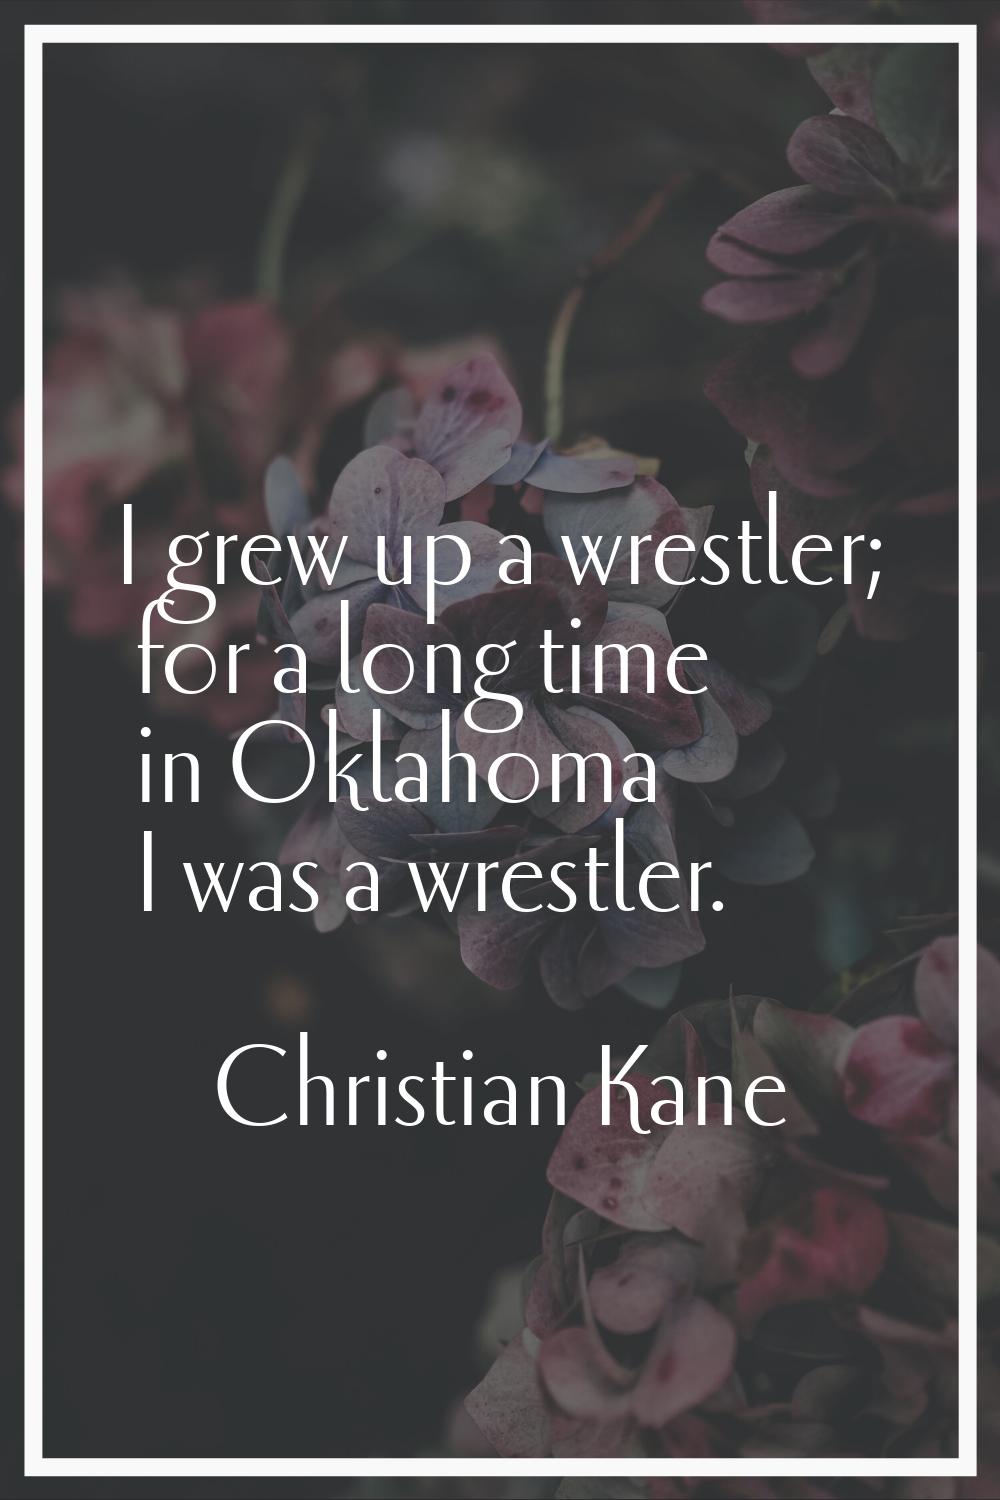 I grew up a wrestler; for a long time in Oklahoma I was a wrestler.